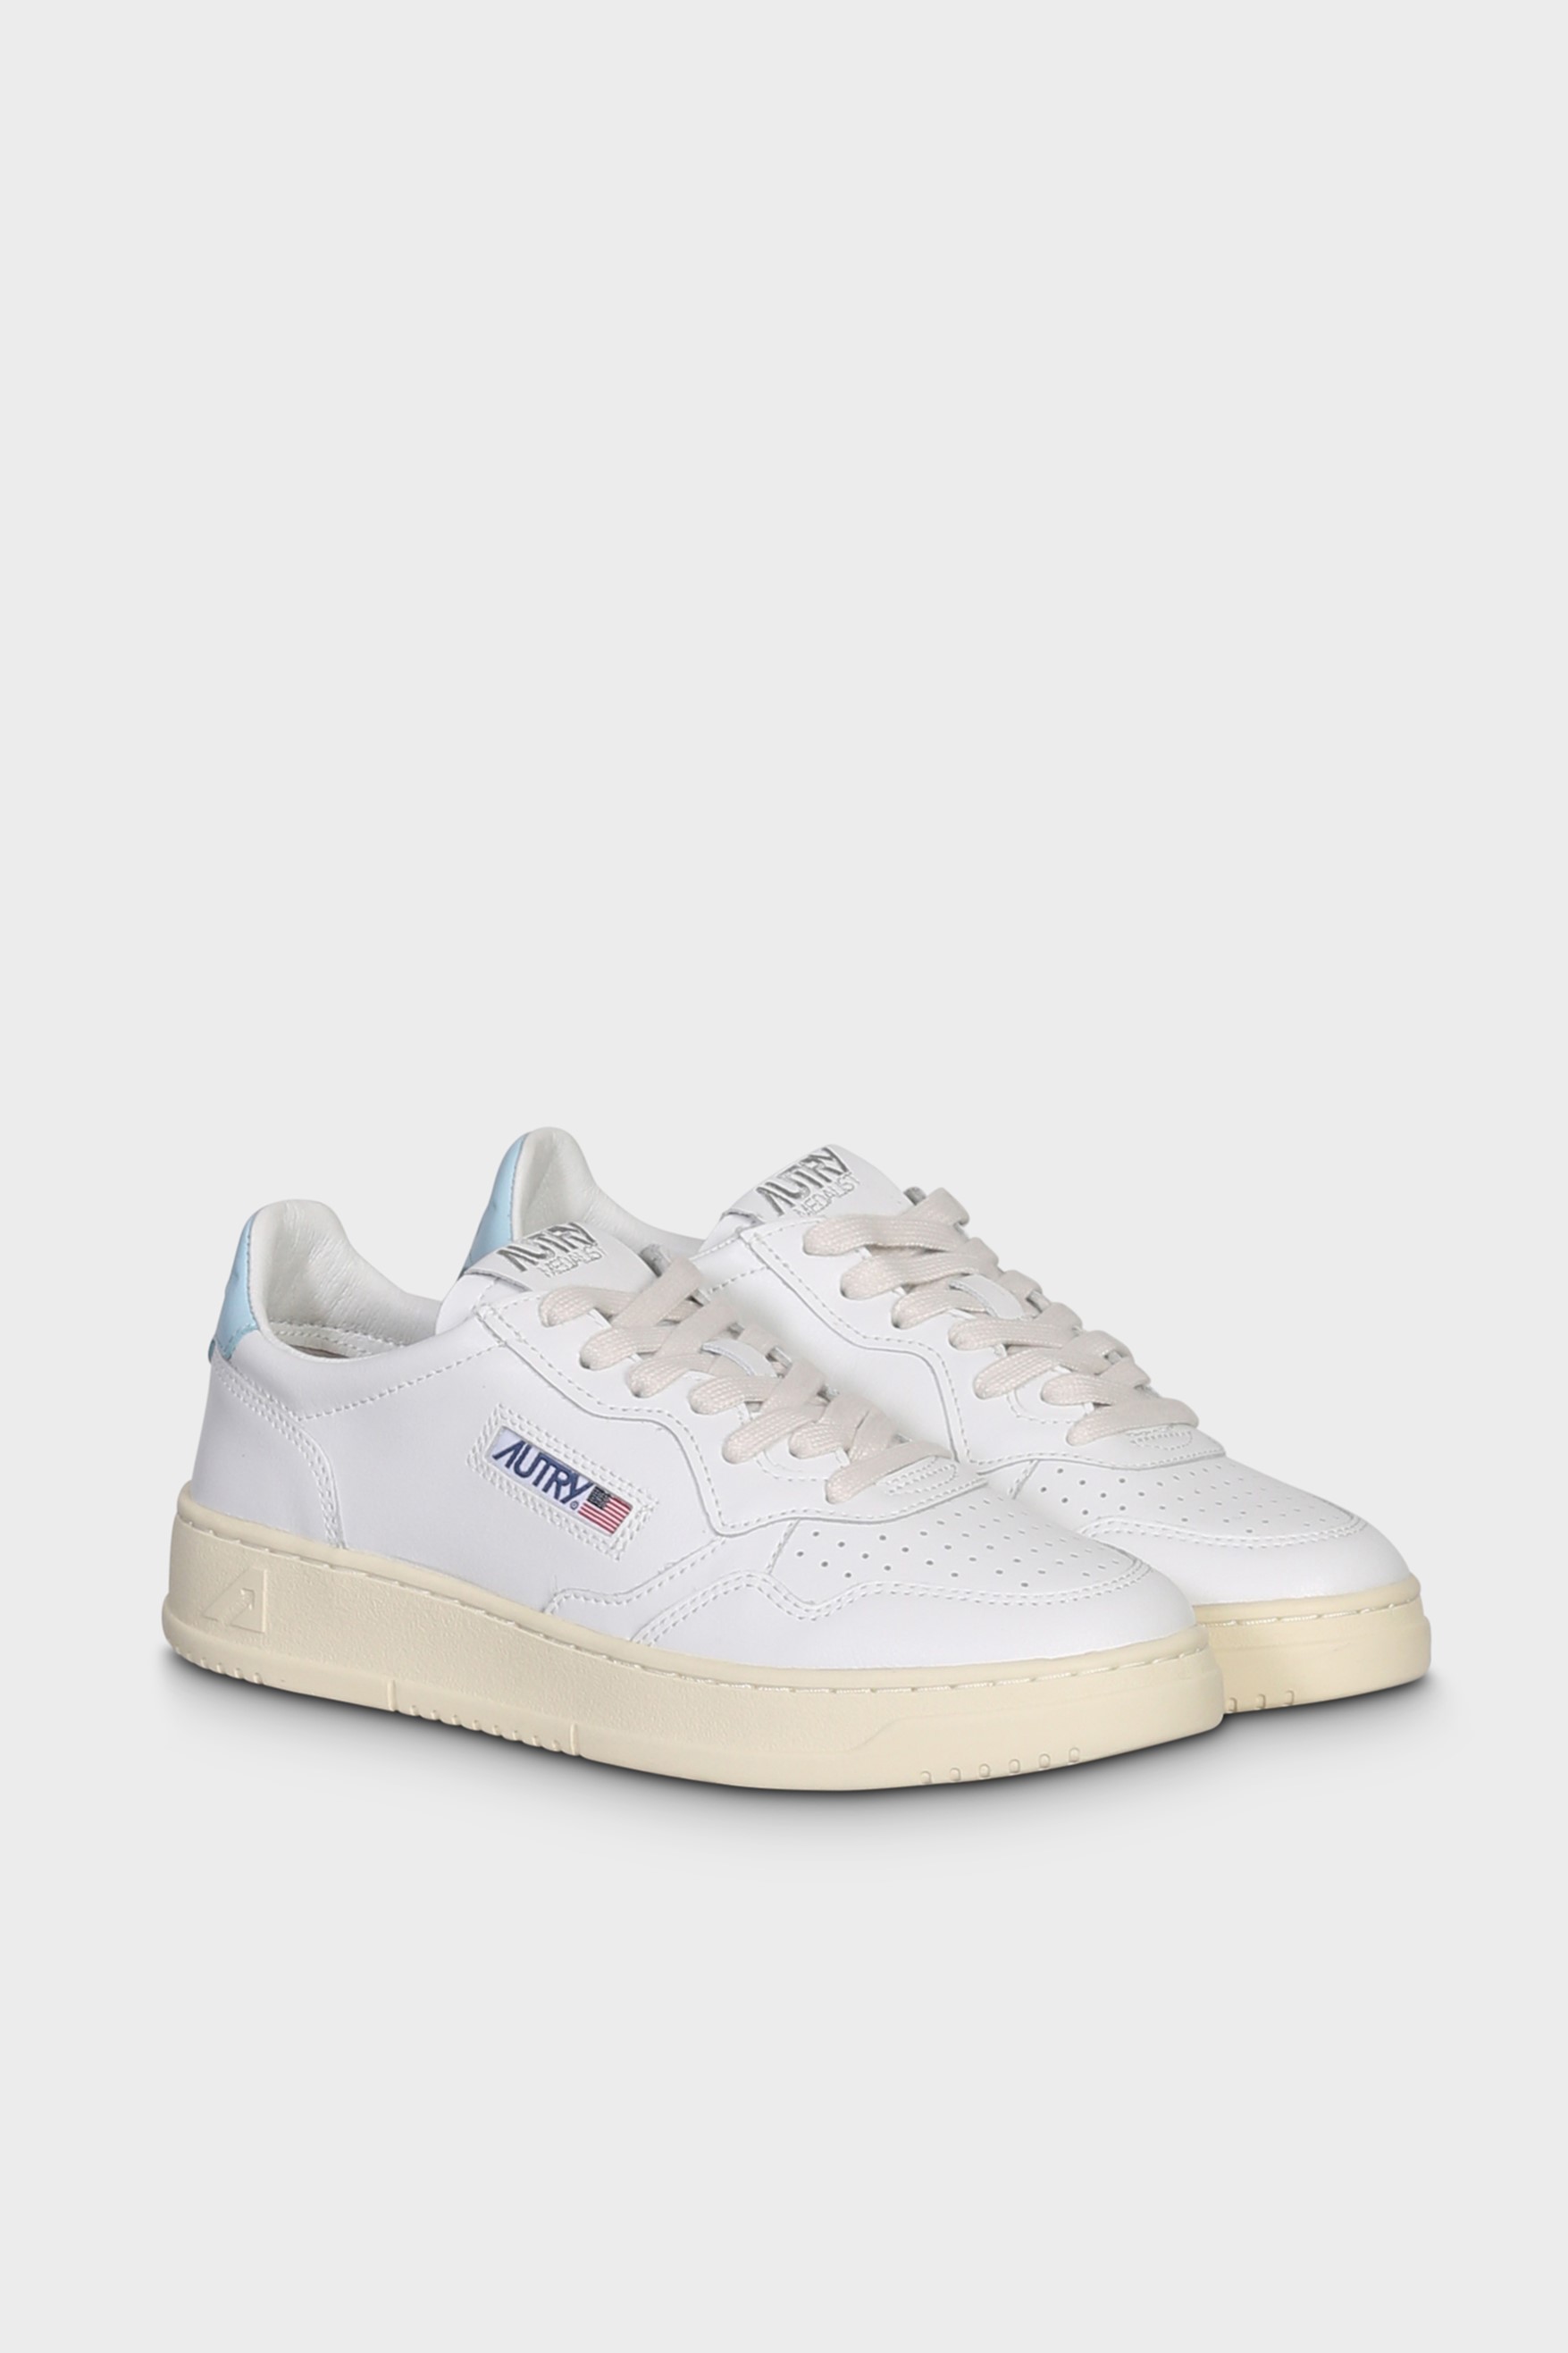 AUTRY ACTION SHOES Sneaker Low in White/Stream Blue 40